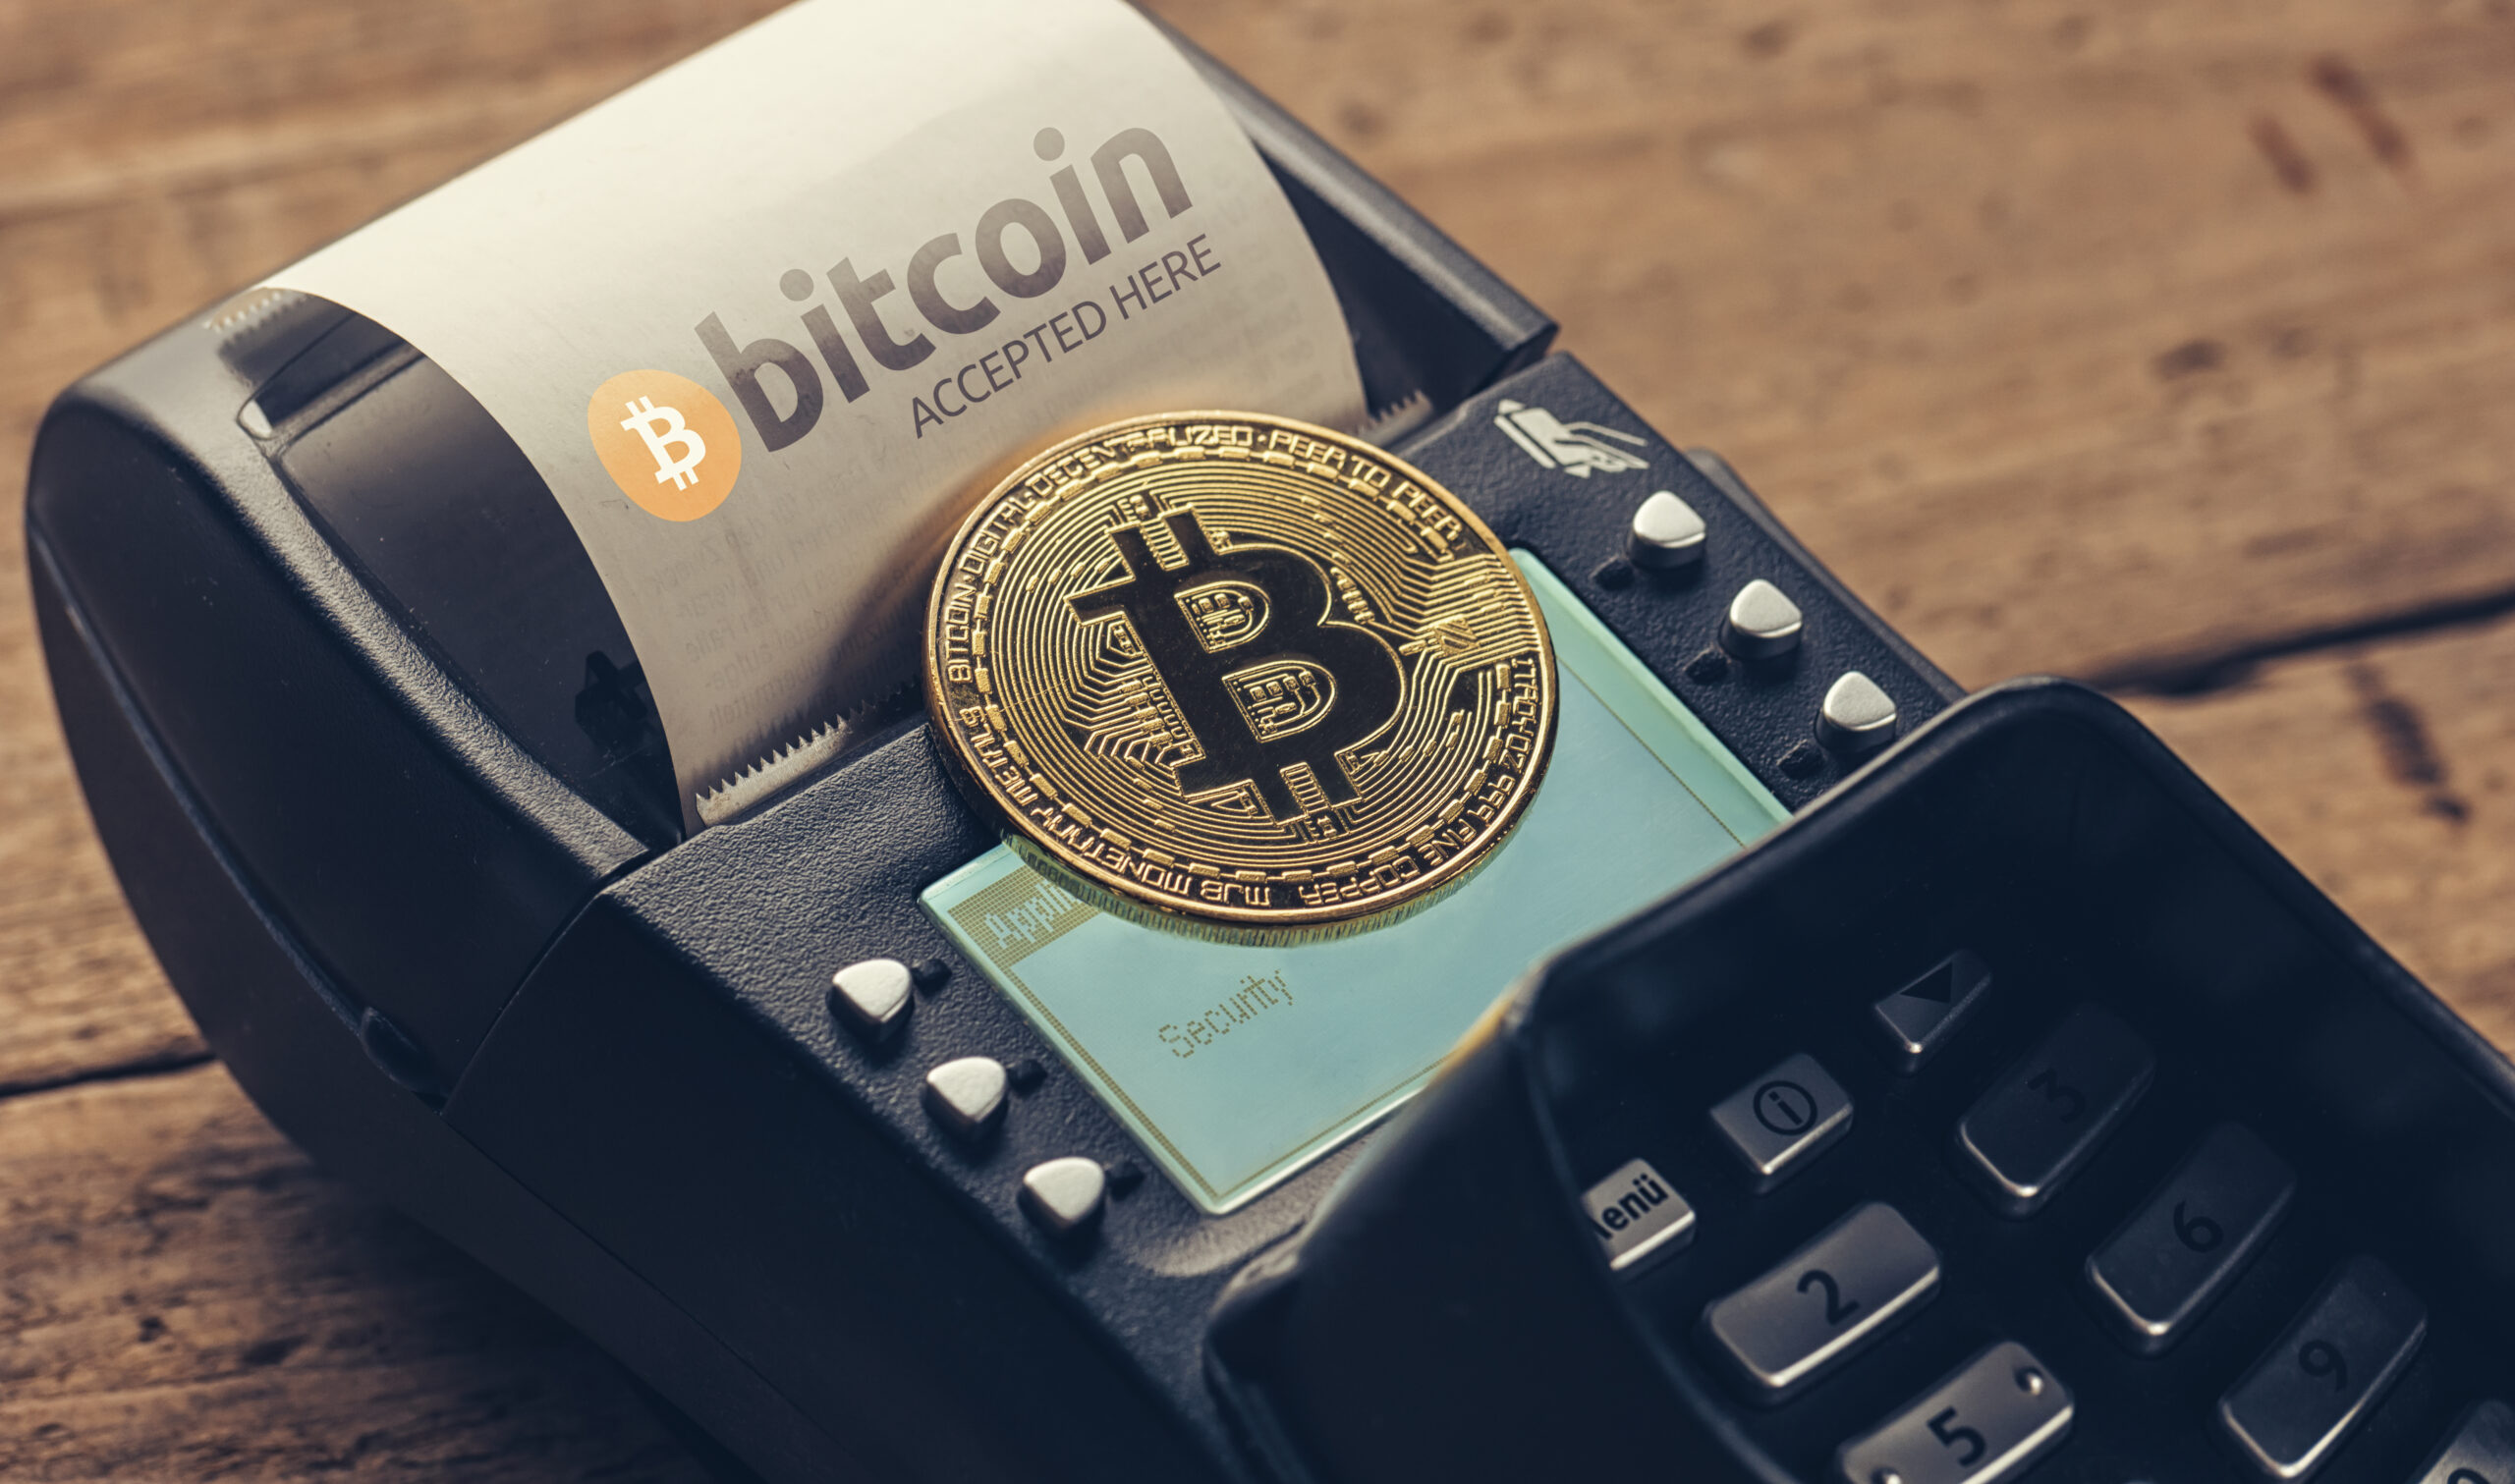 Who accepts bitcoins as payment?